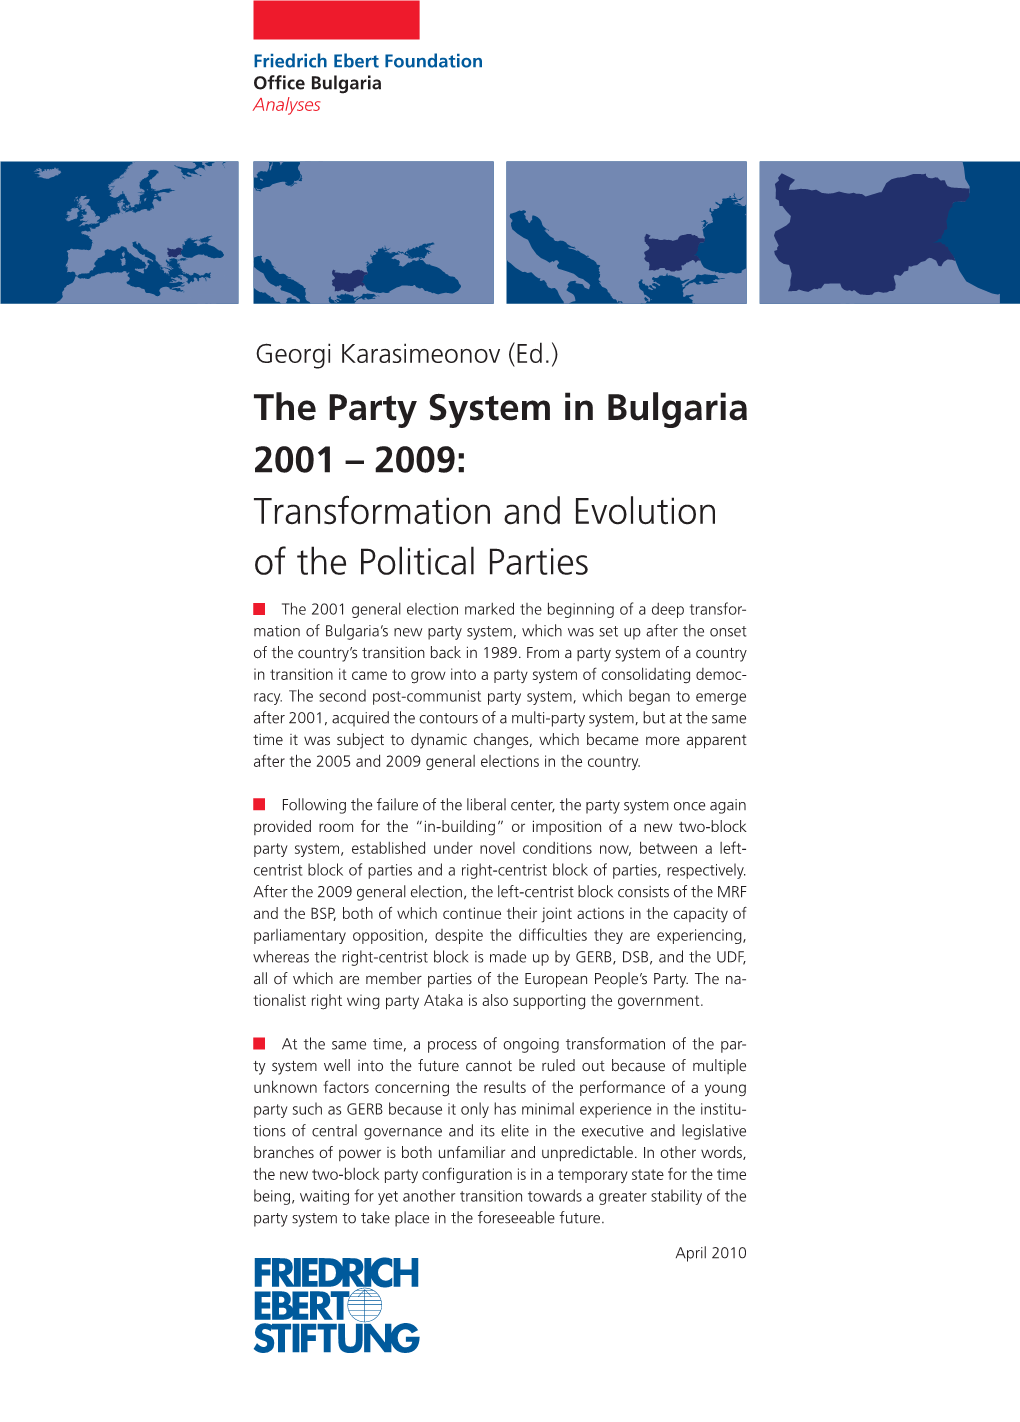 April 2010 the 2001 General Election Marked the Beginning of a Deep Transfor- Mation of Bulgaria's New Party System, Which